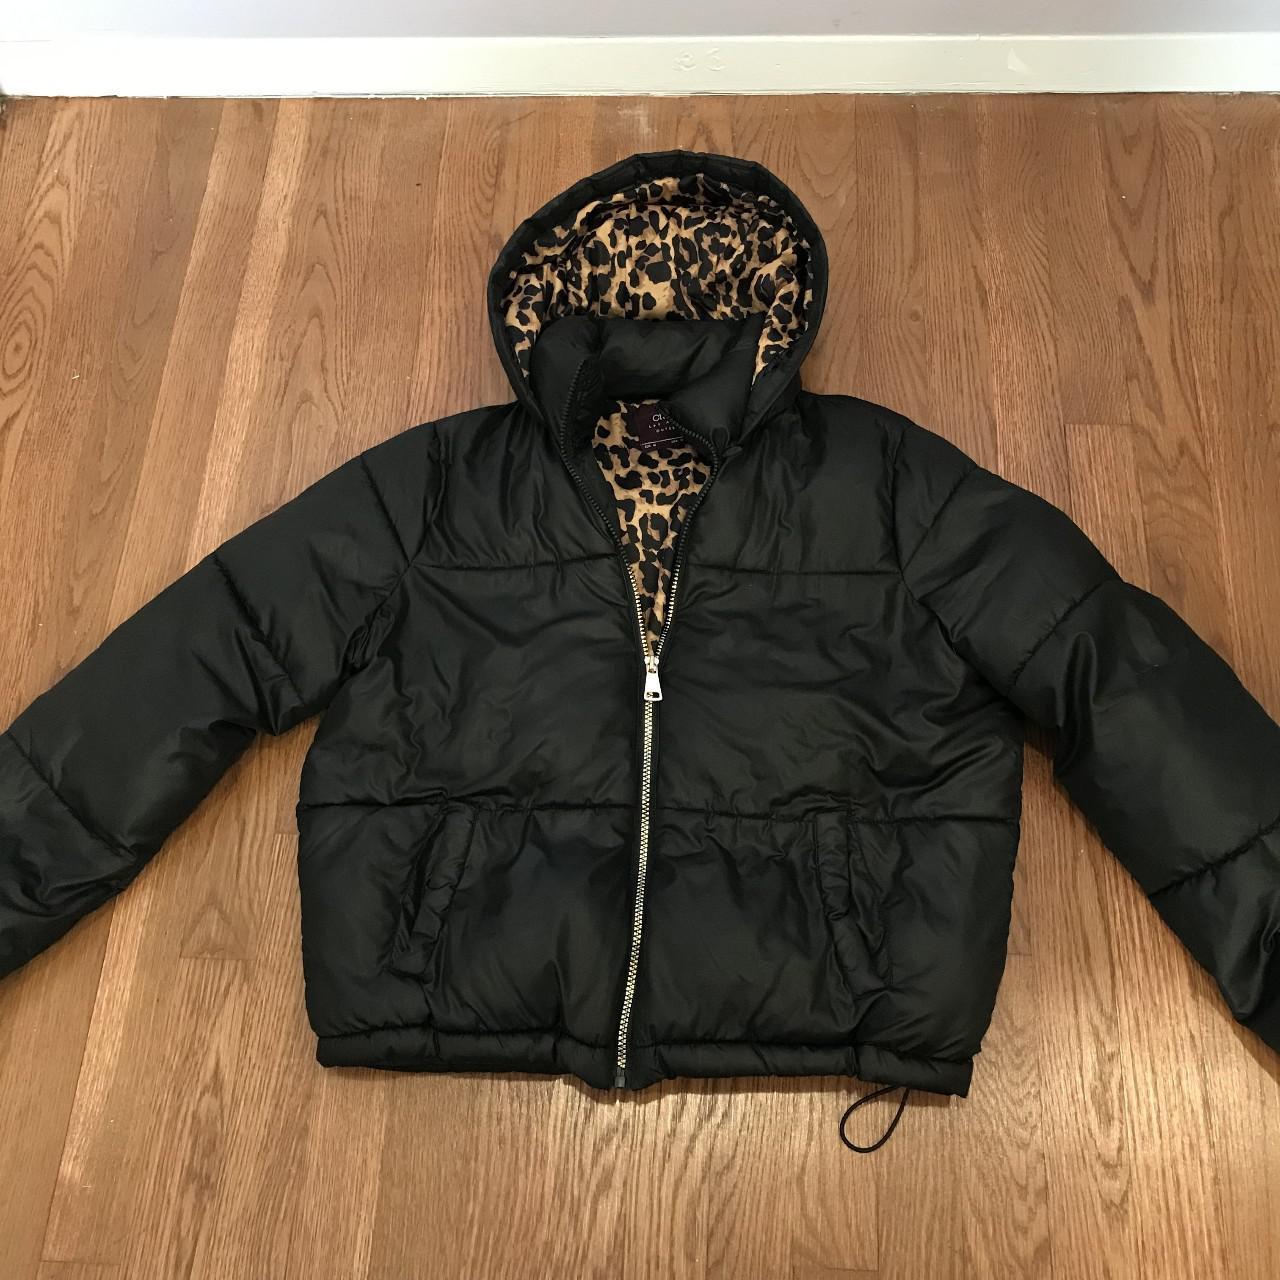 Urban Outfitters Women's Jacket (3)